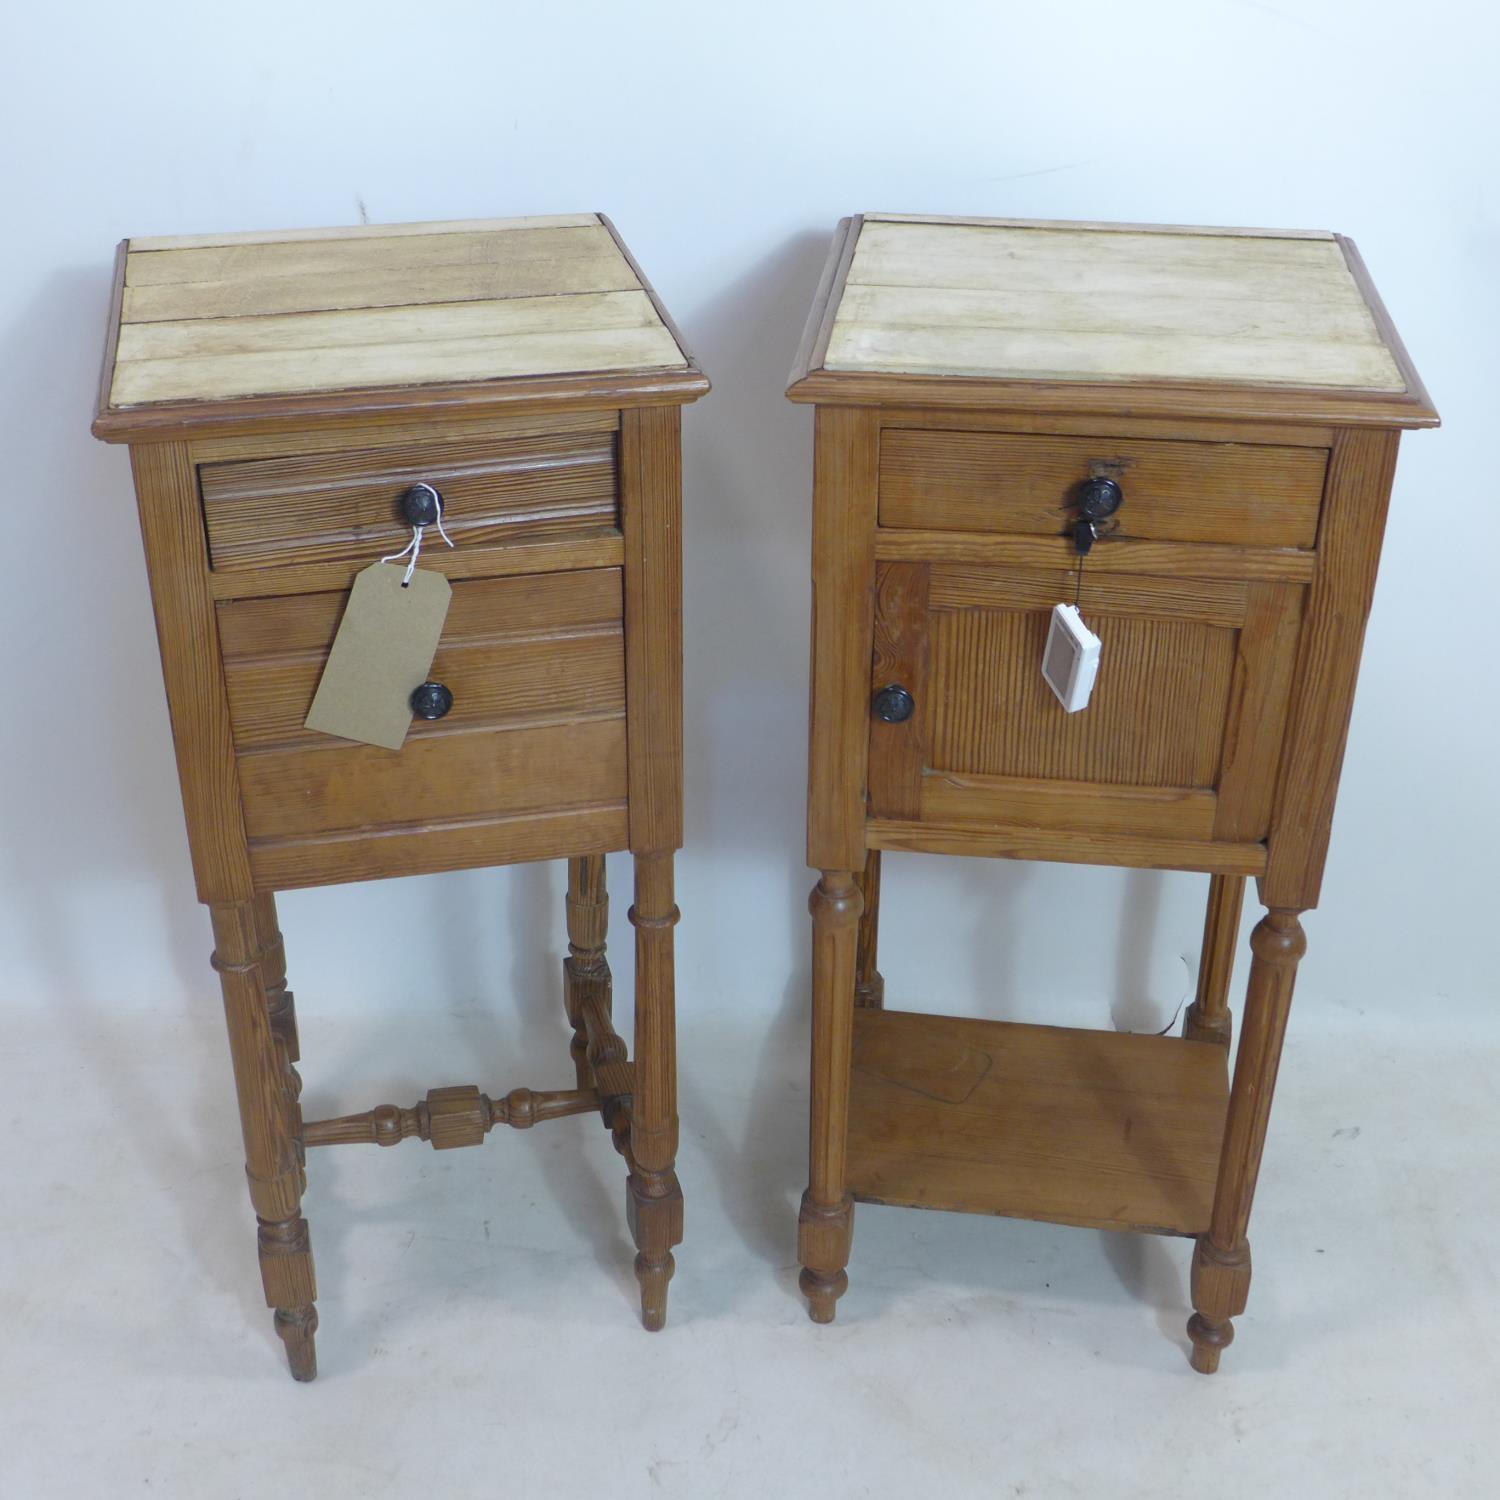 A pair of 20th century French pine bedside cabinets, H.80 W.37 D.36cm - Image 2 of 2